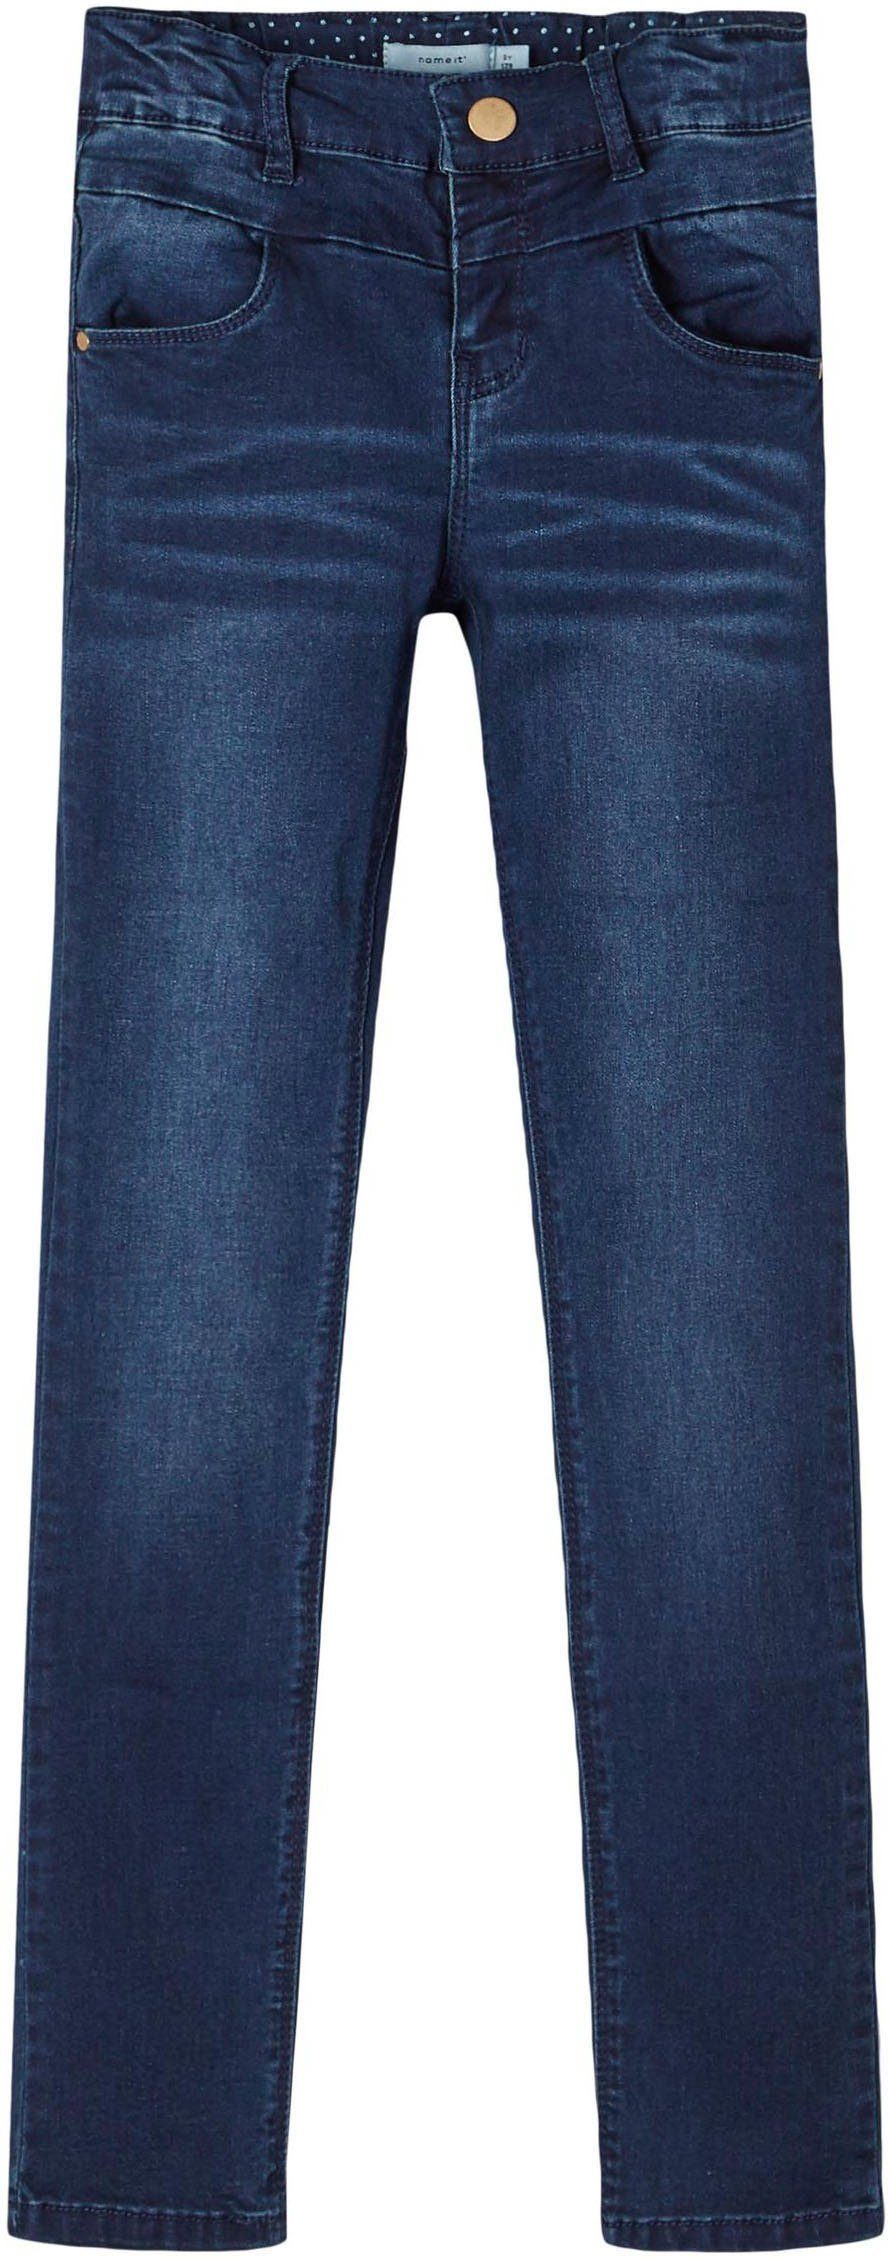 It schmaler Name Passform in NKFPOLLY Stretch-Jeans